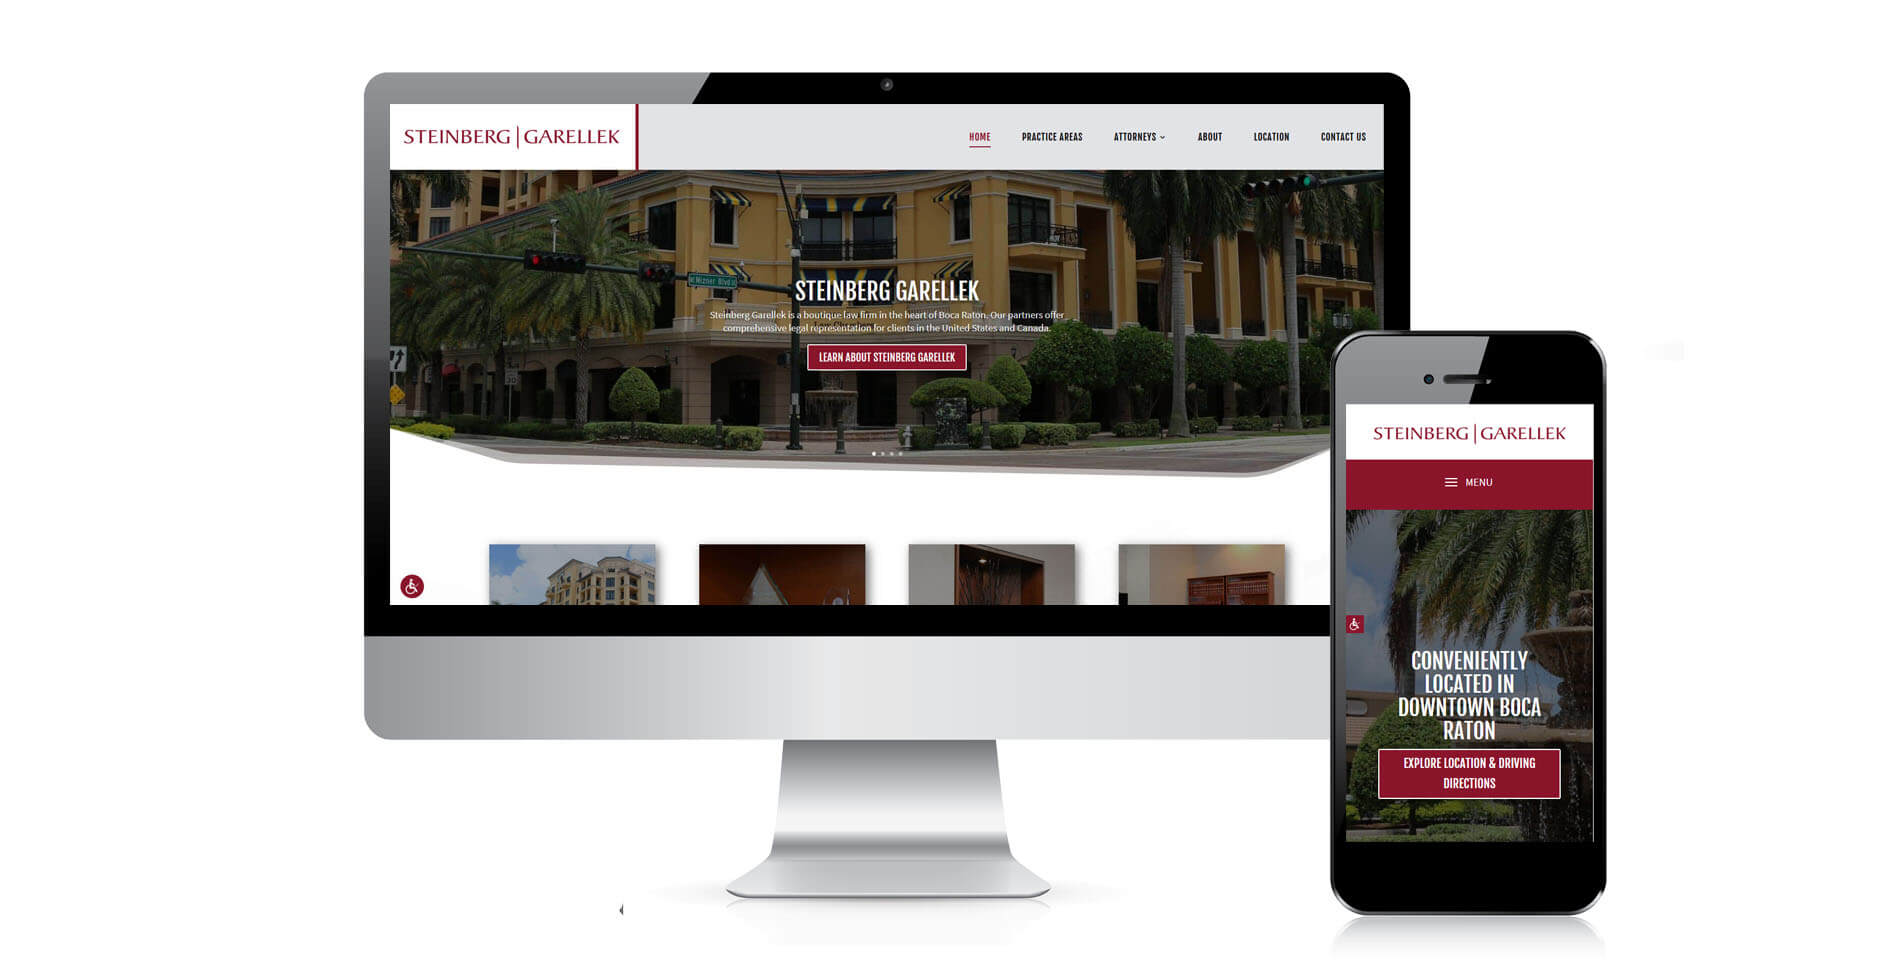 An image of the responsive design of Steinberg Garellek, website created by Not Fade Away Marketing